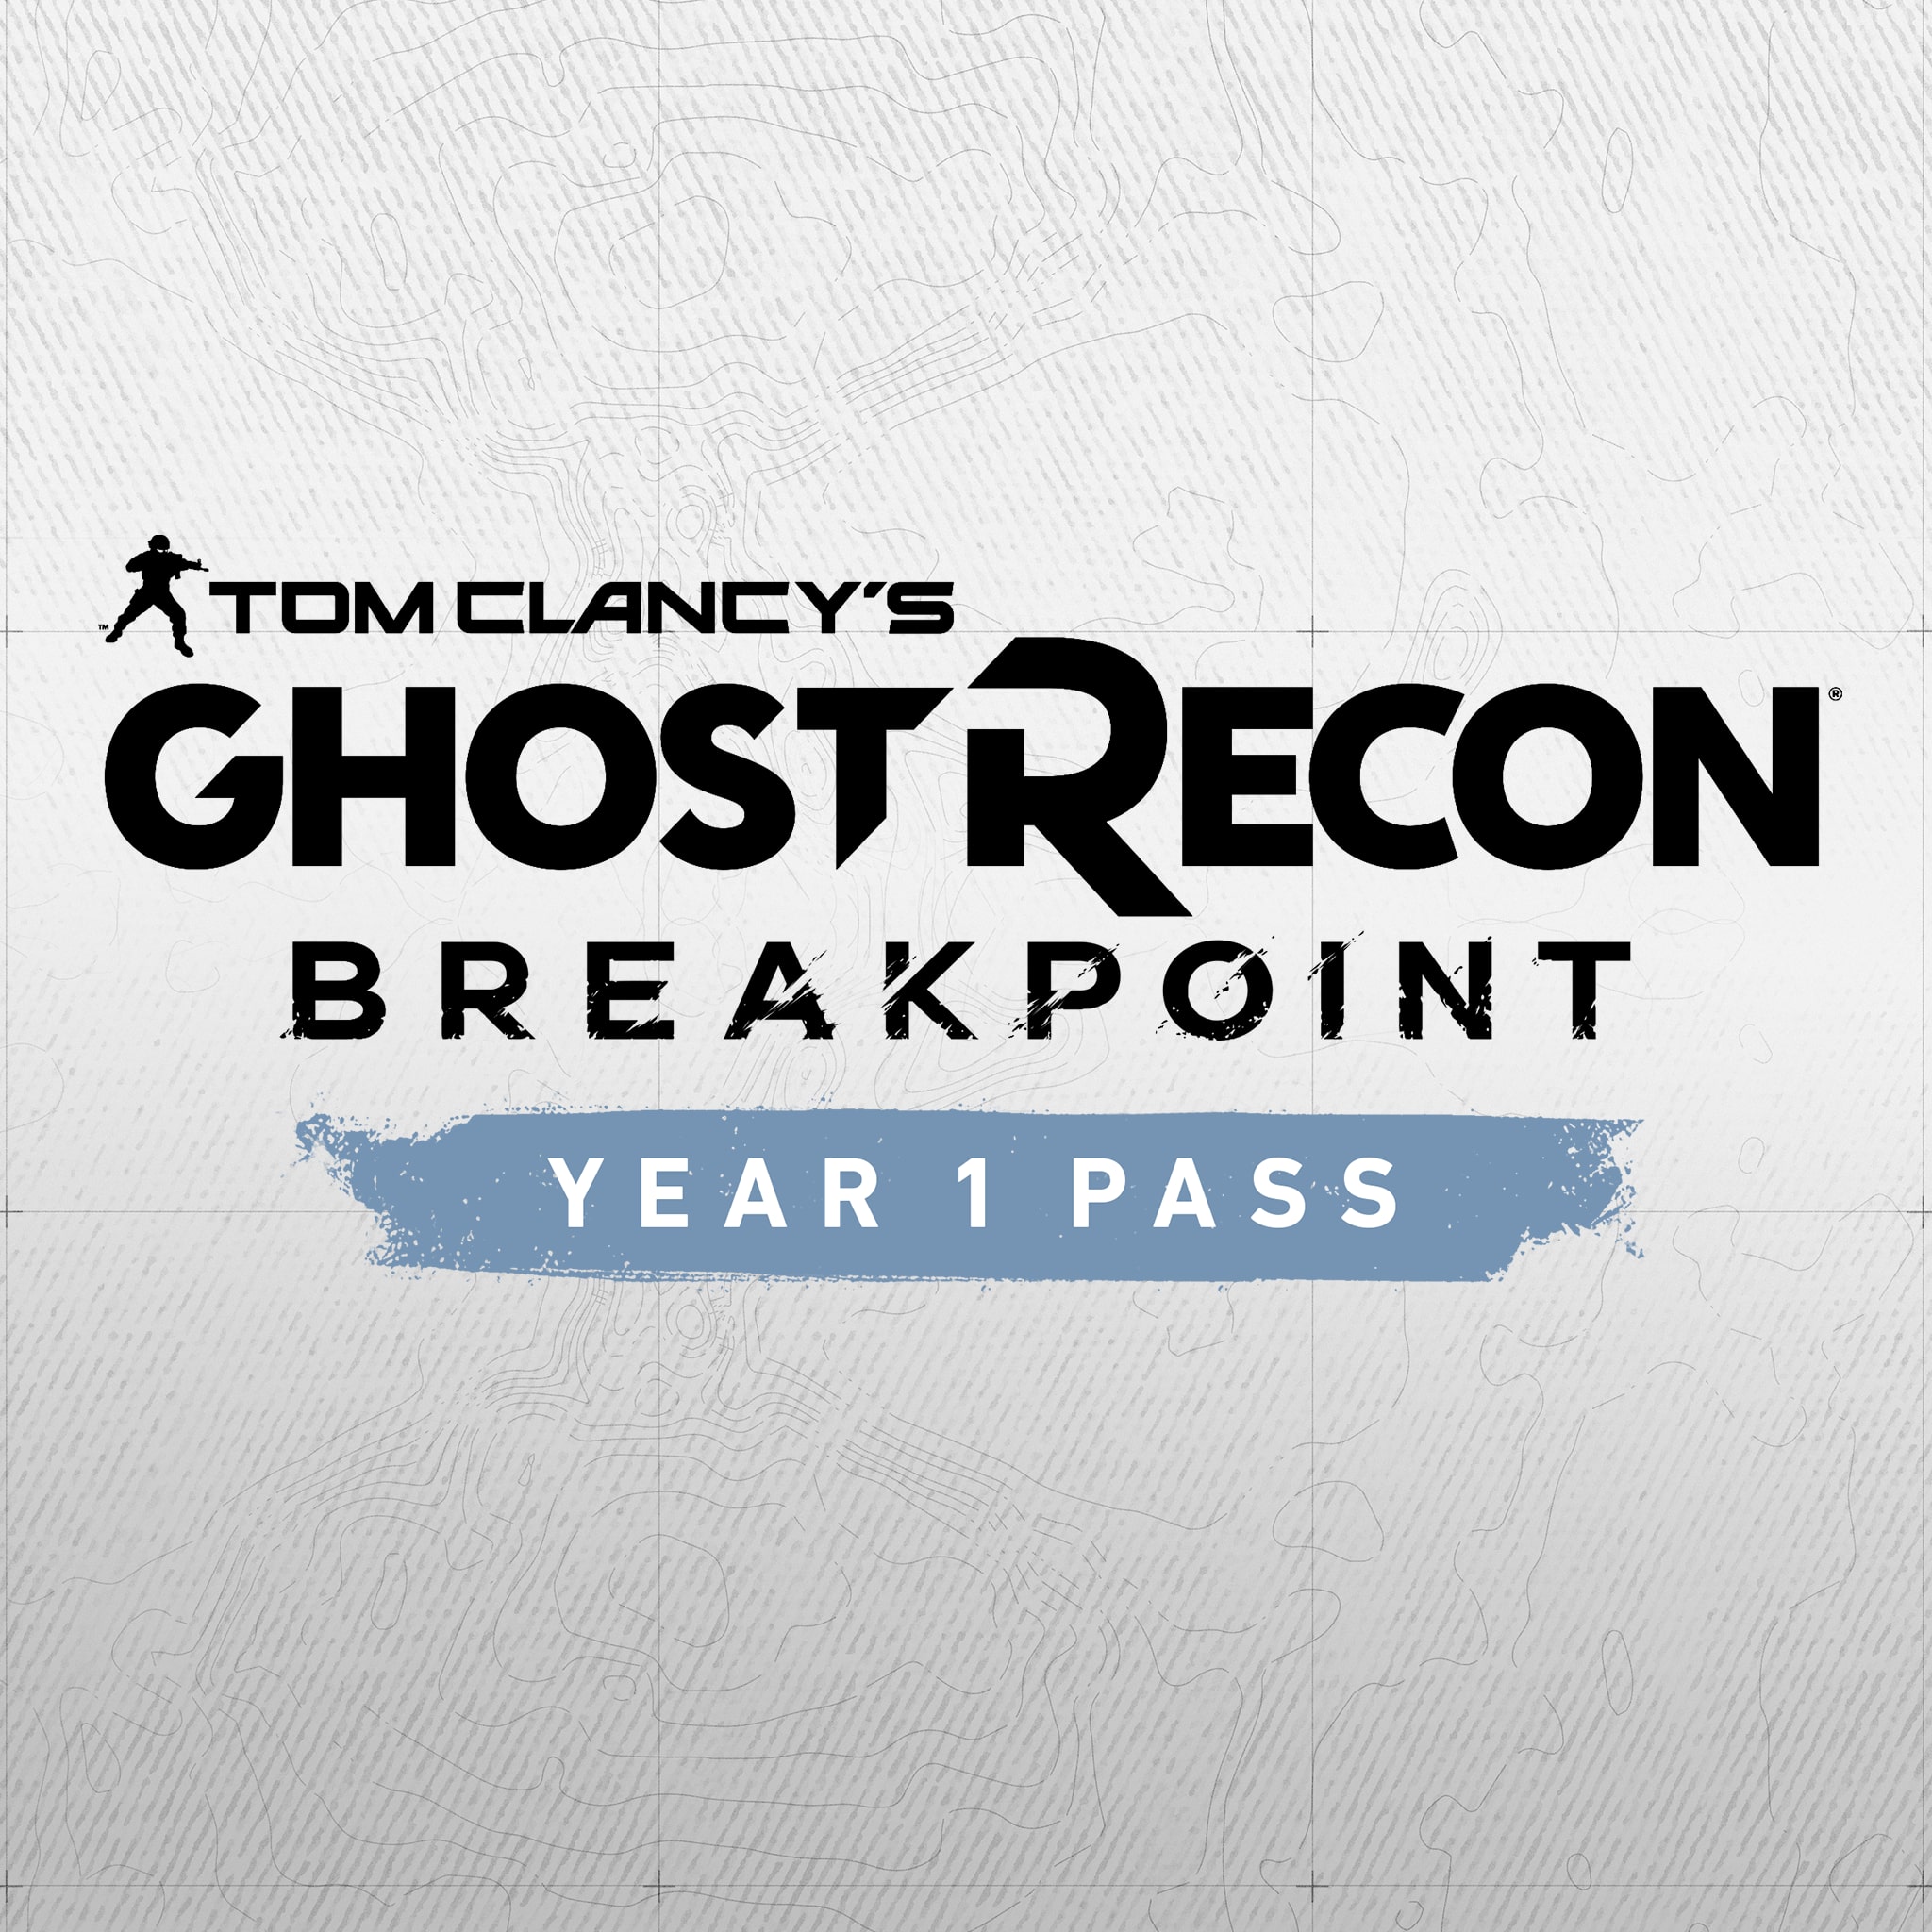 Tom Clancy’s Ghost Recon Breakpoint Year 1 Pass